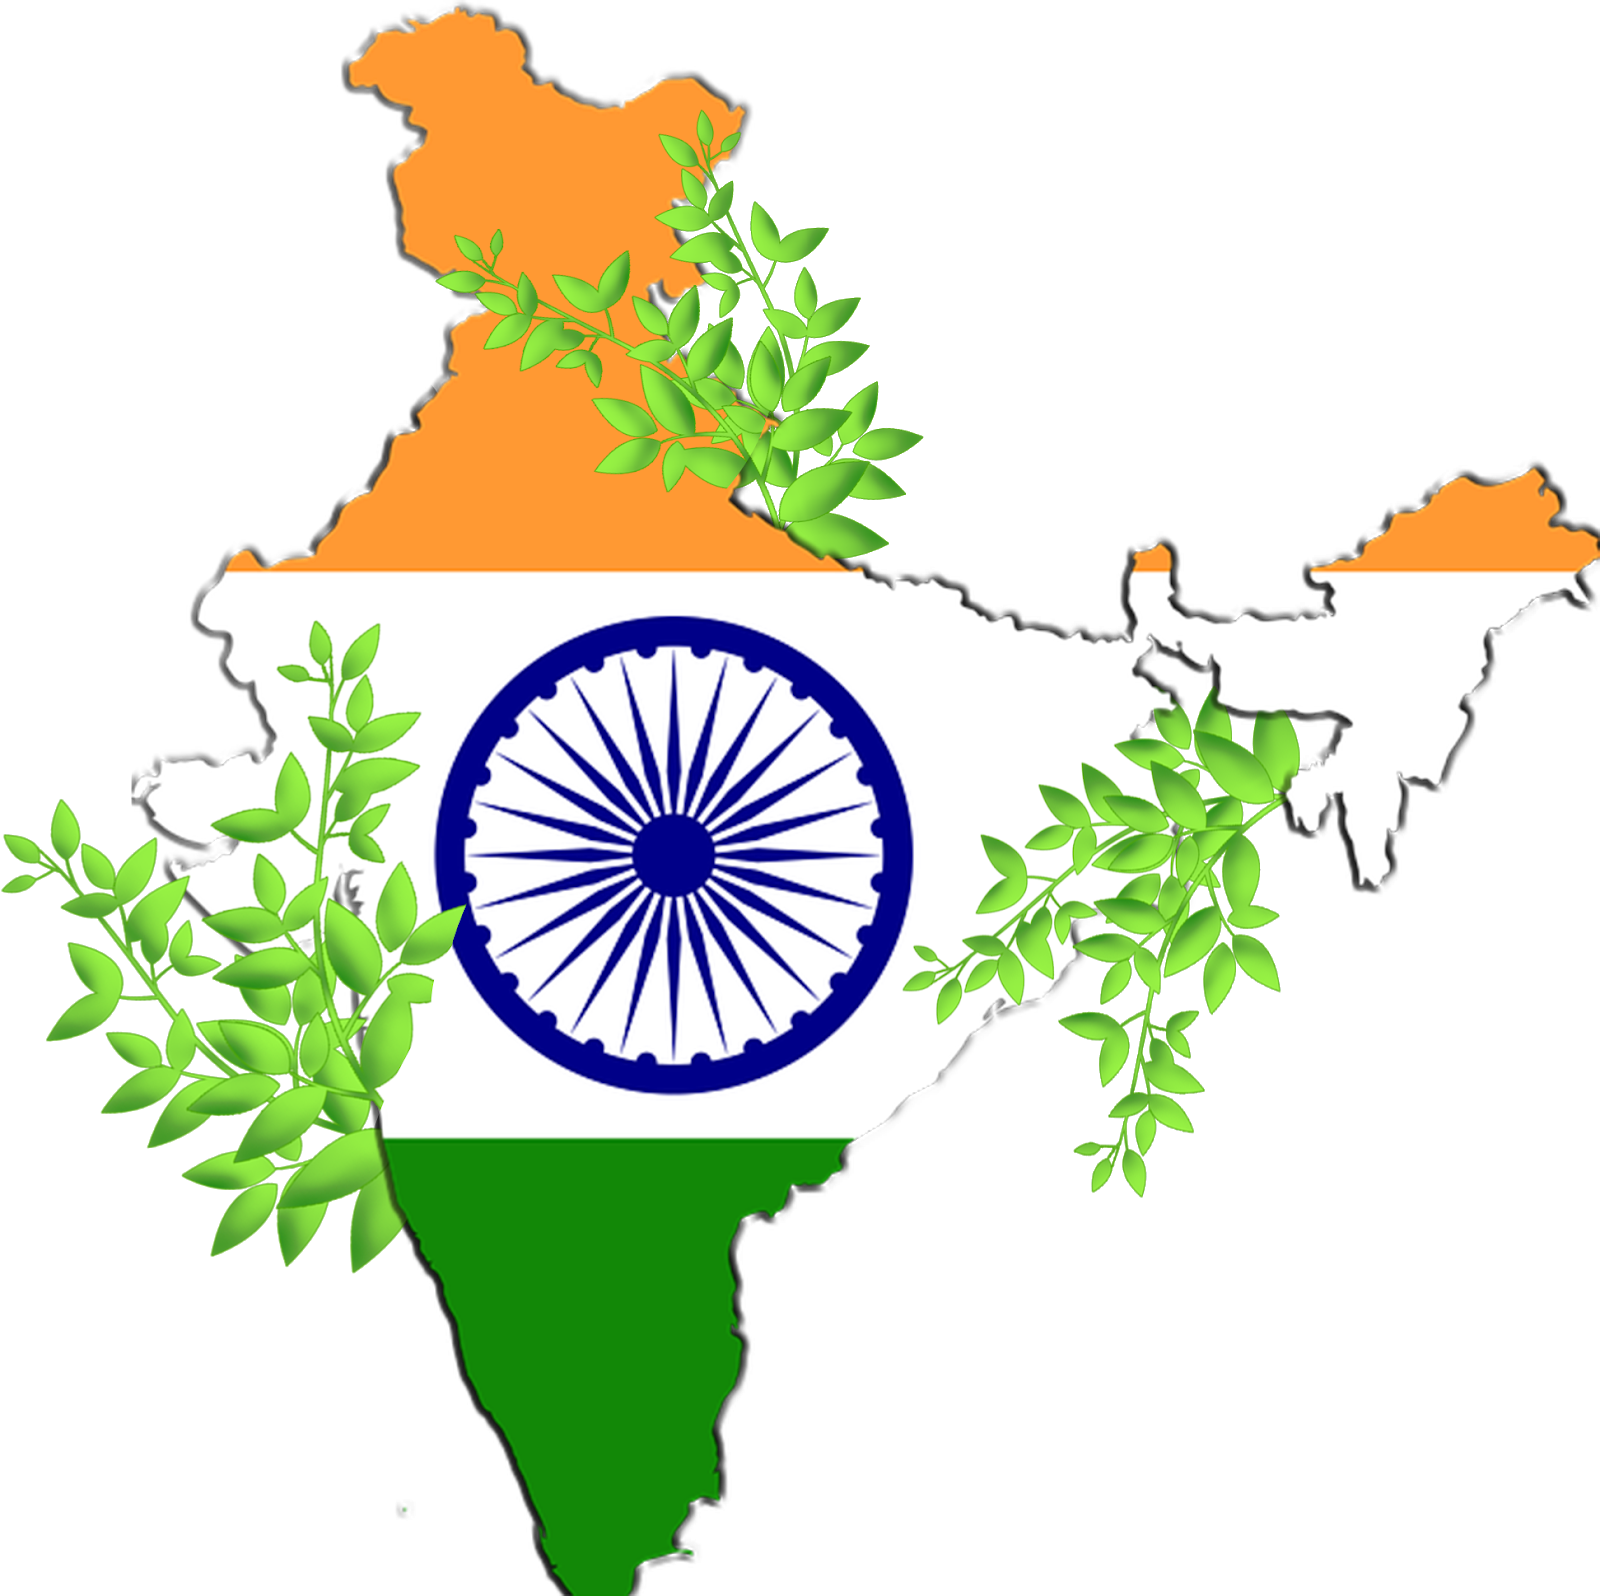 India Mapwith National Flagand Greenery PNG image